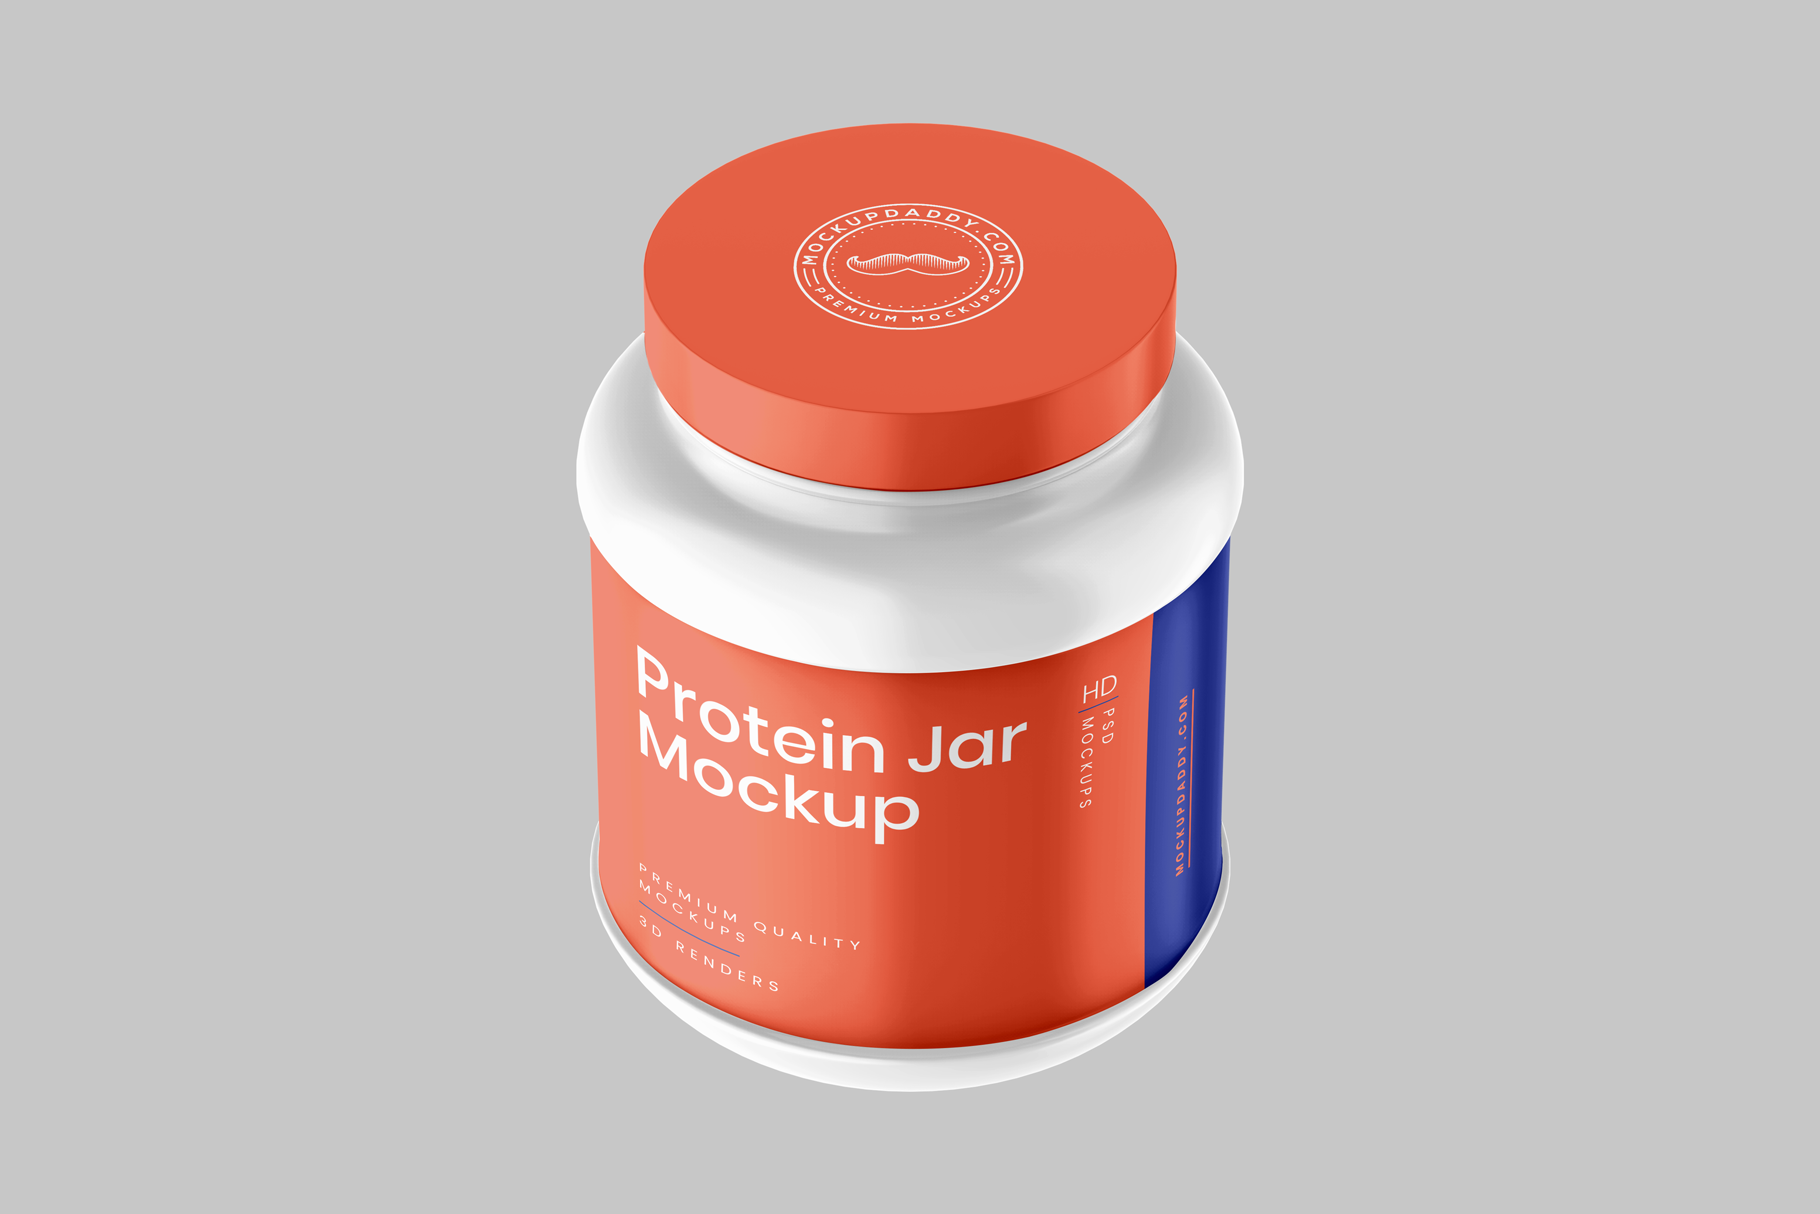 White Protein Jar Mockup with red and blue label and red lid from the top side.